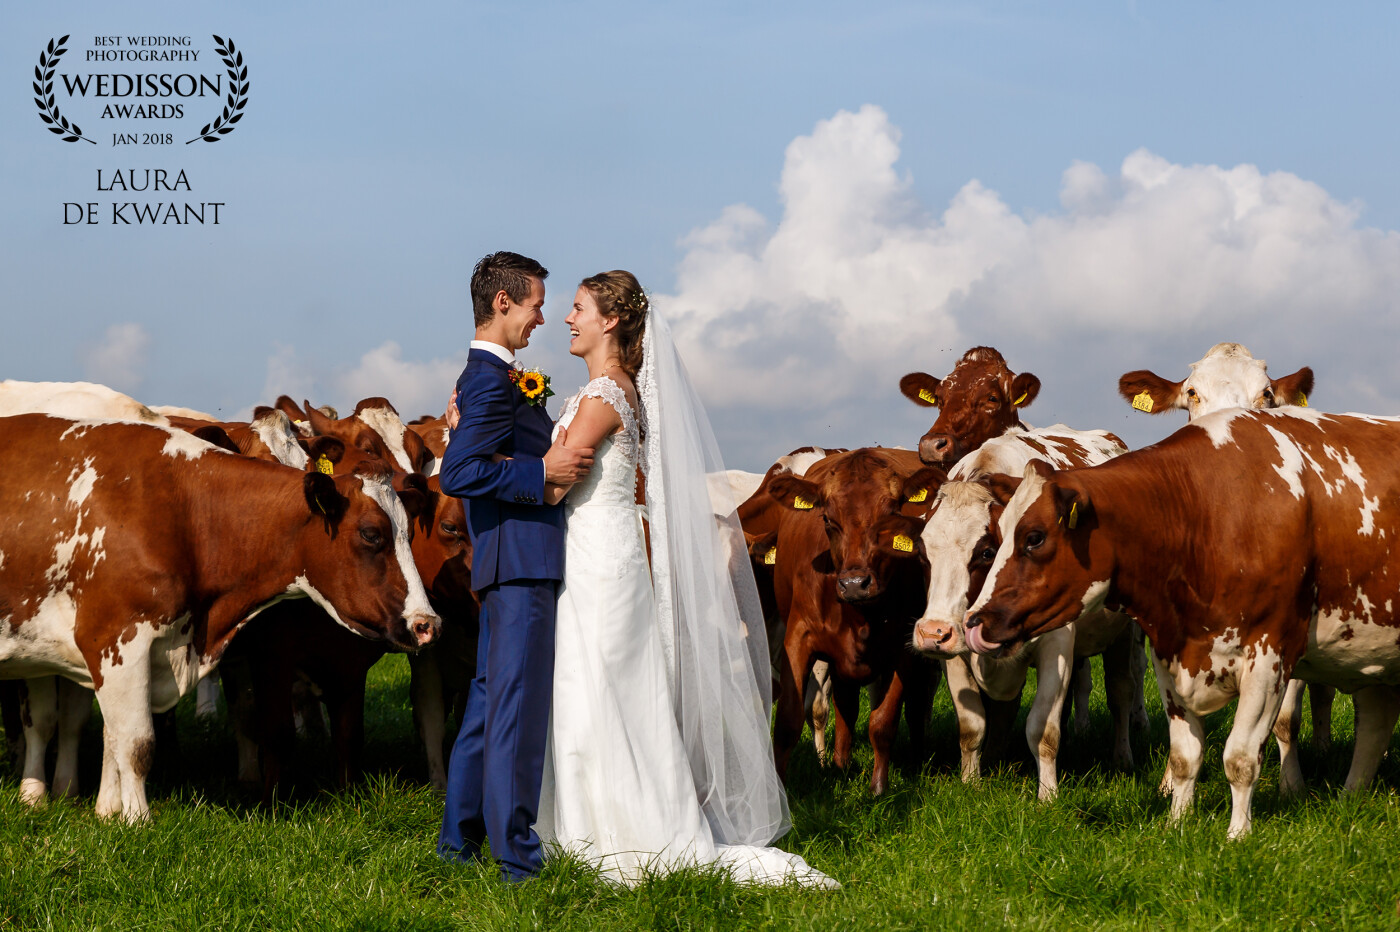 Meet this cute couple! They have their own farm and their wish was to make pictures on the farm on their wedding day between the cows. How awesome is this?! This photoshoot was really special to me!